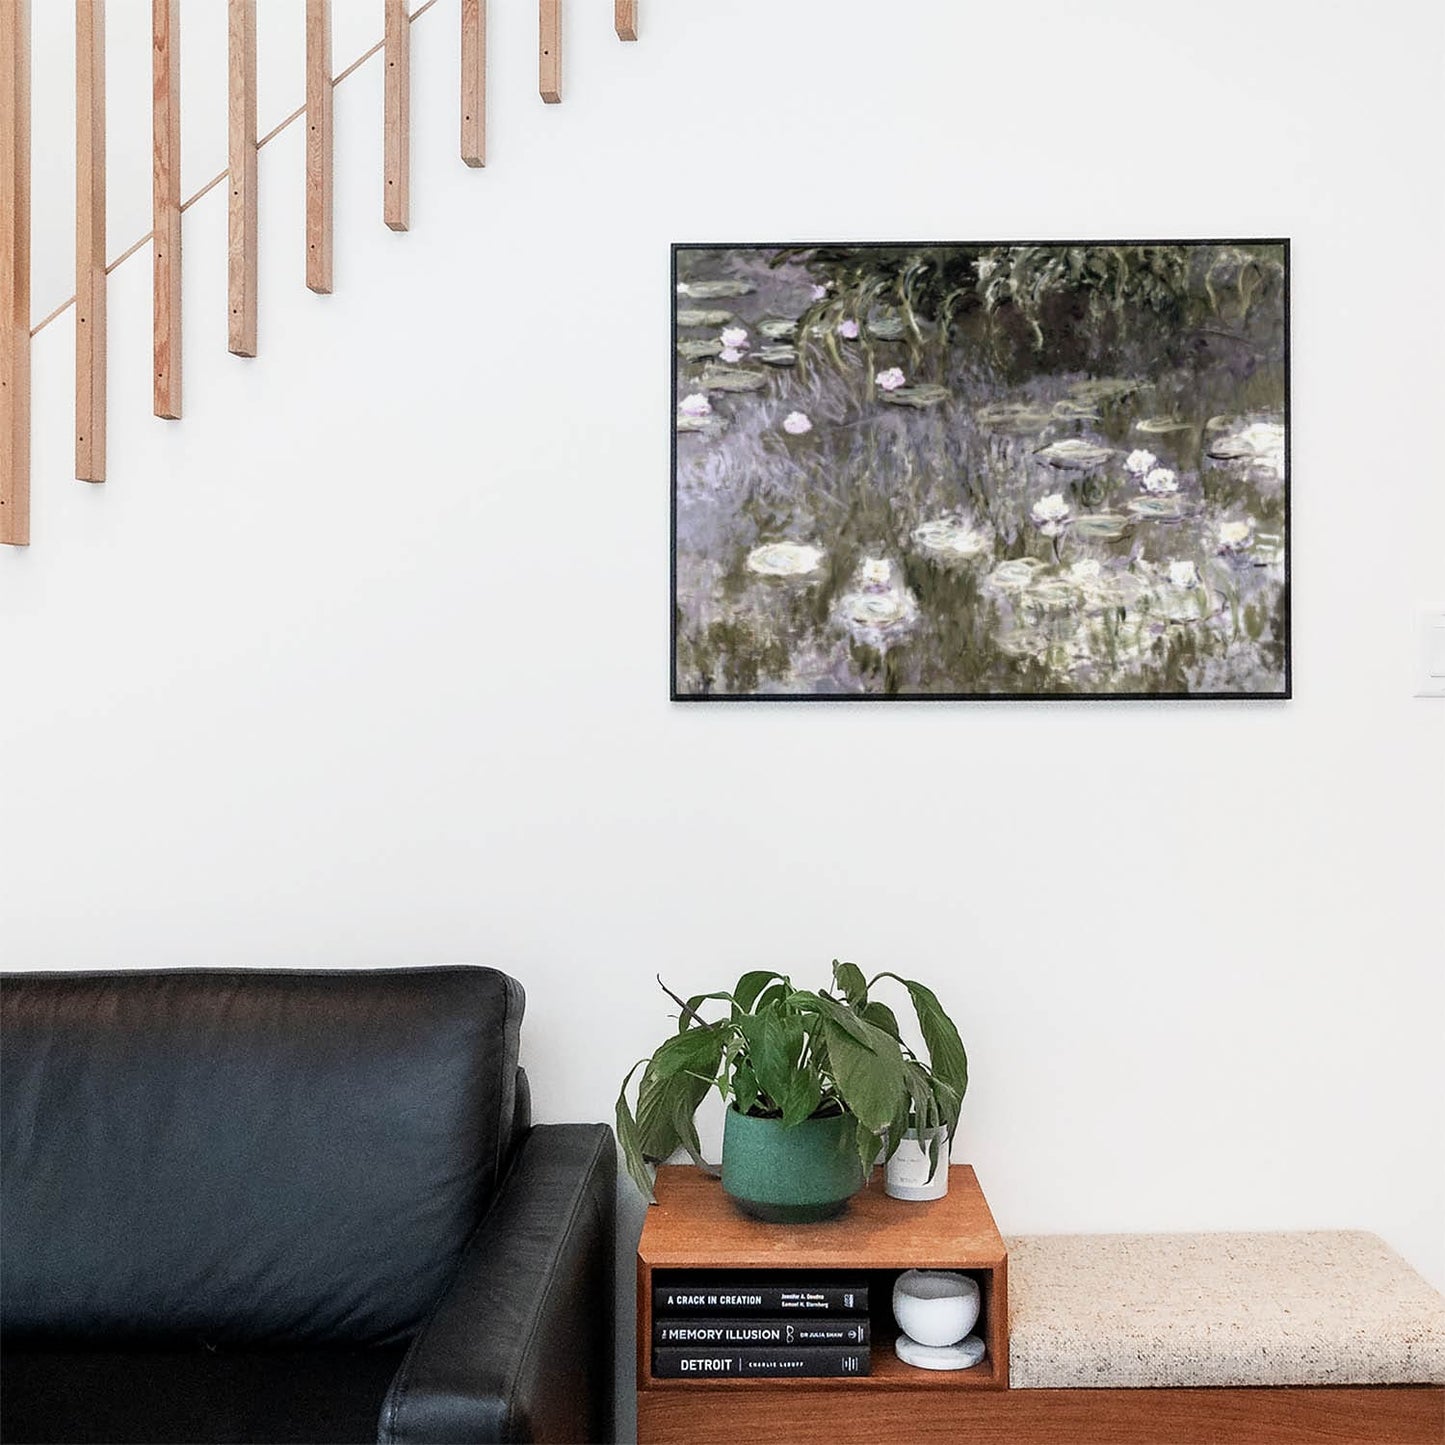 White Lilies on a Pond Wall Art Print in a Picture Frame on Living Room Wall